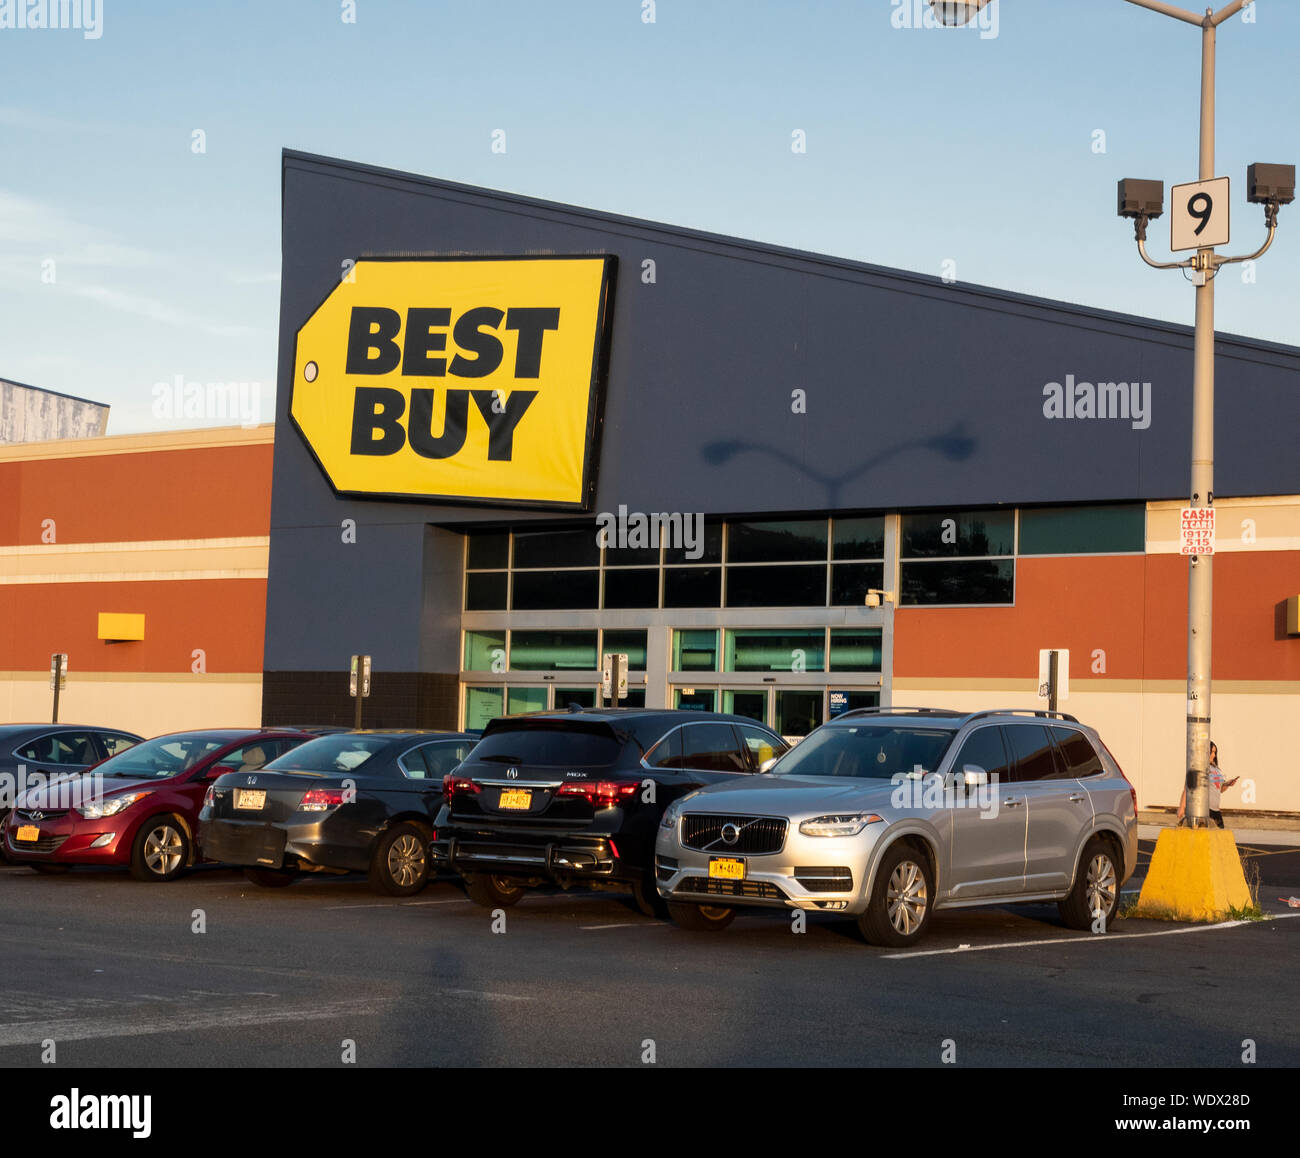 Brooklyn, NY, USA - August 12, 2019: Exterior of Best Buy - an